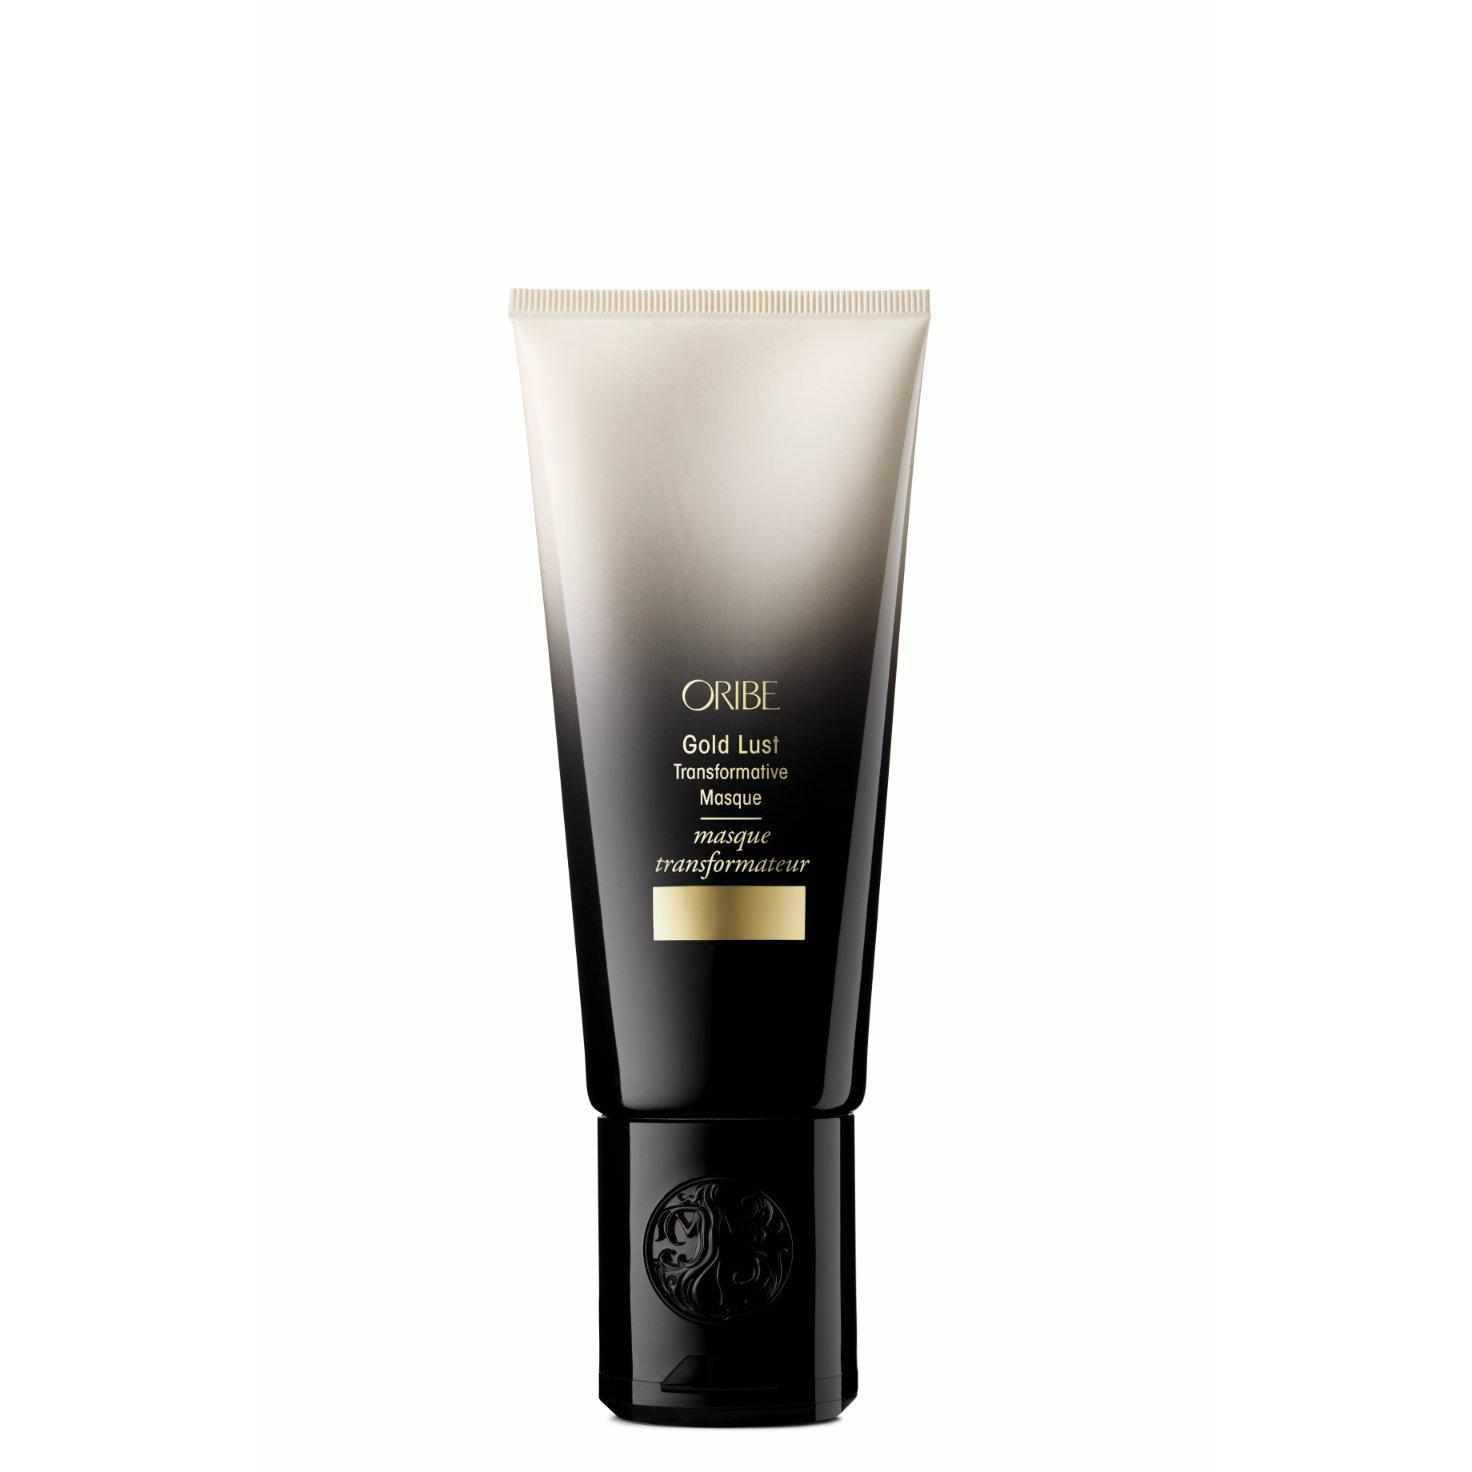 luxury_haircare_Oribe_haircare_1041_Gold_Lust_Transformative_Masque